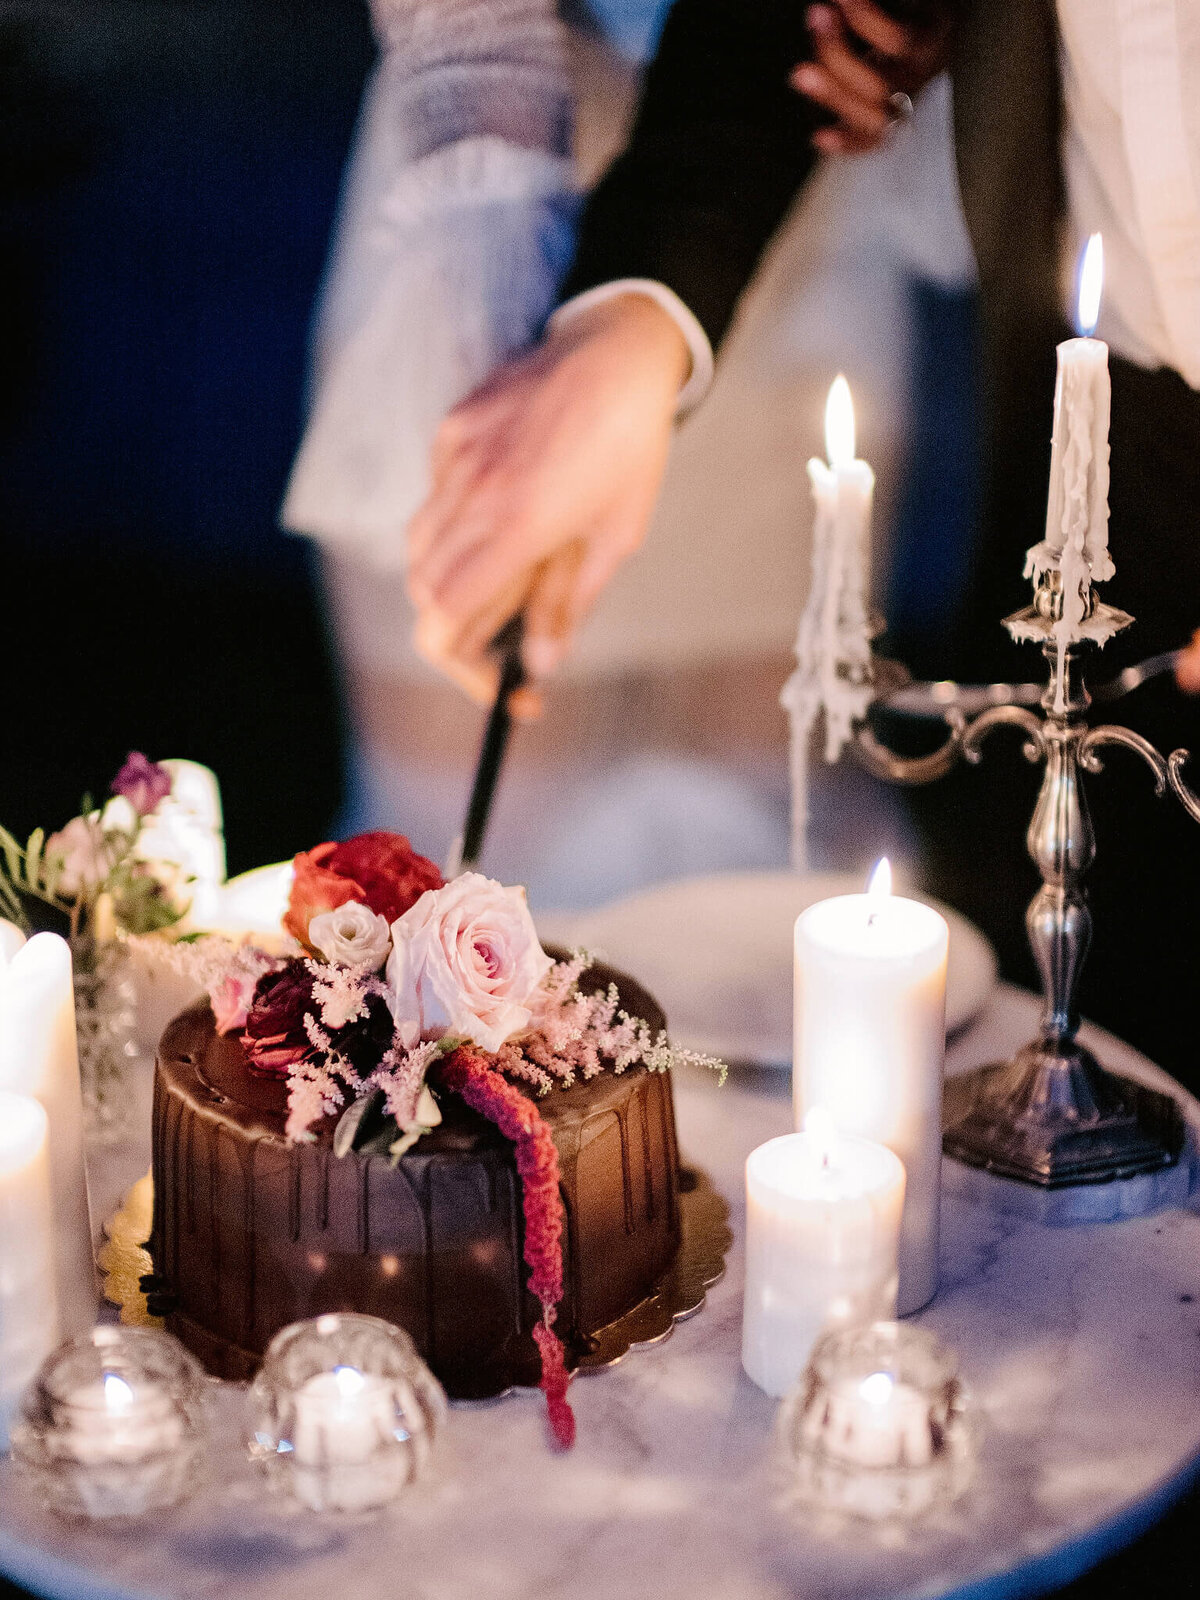 A chocolate cake with pink and red flowers on top, is on a table with candles around it, with two hands cutting it.